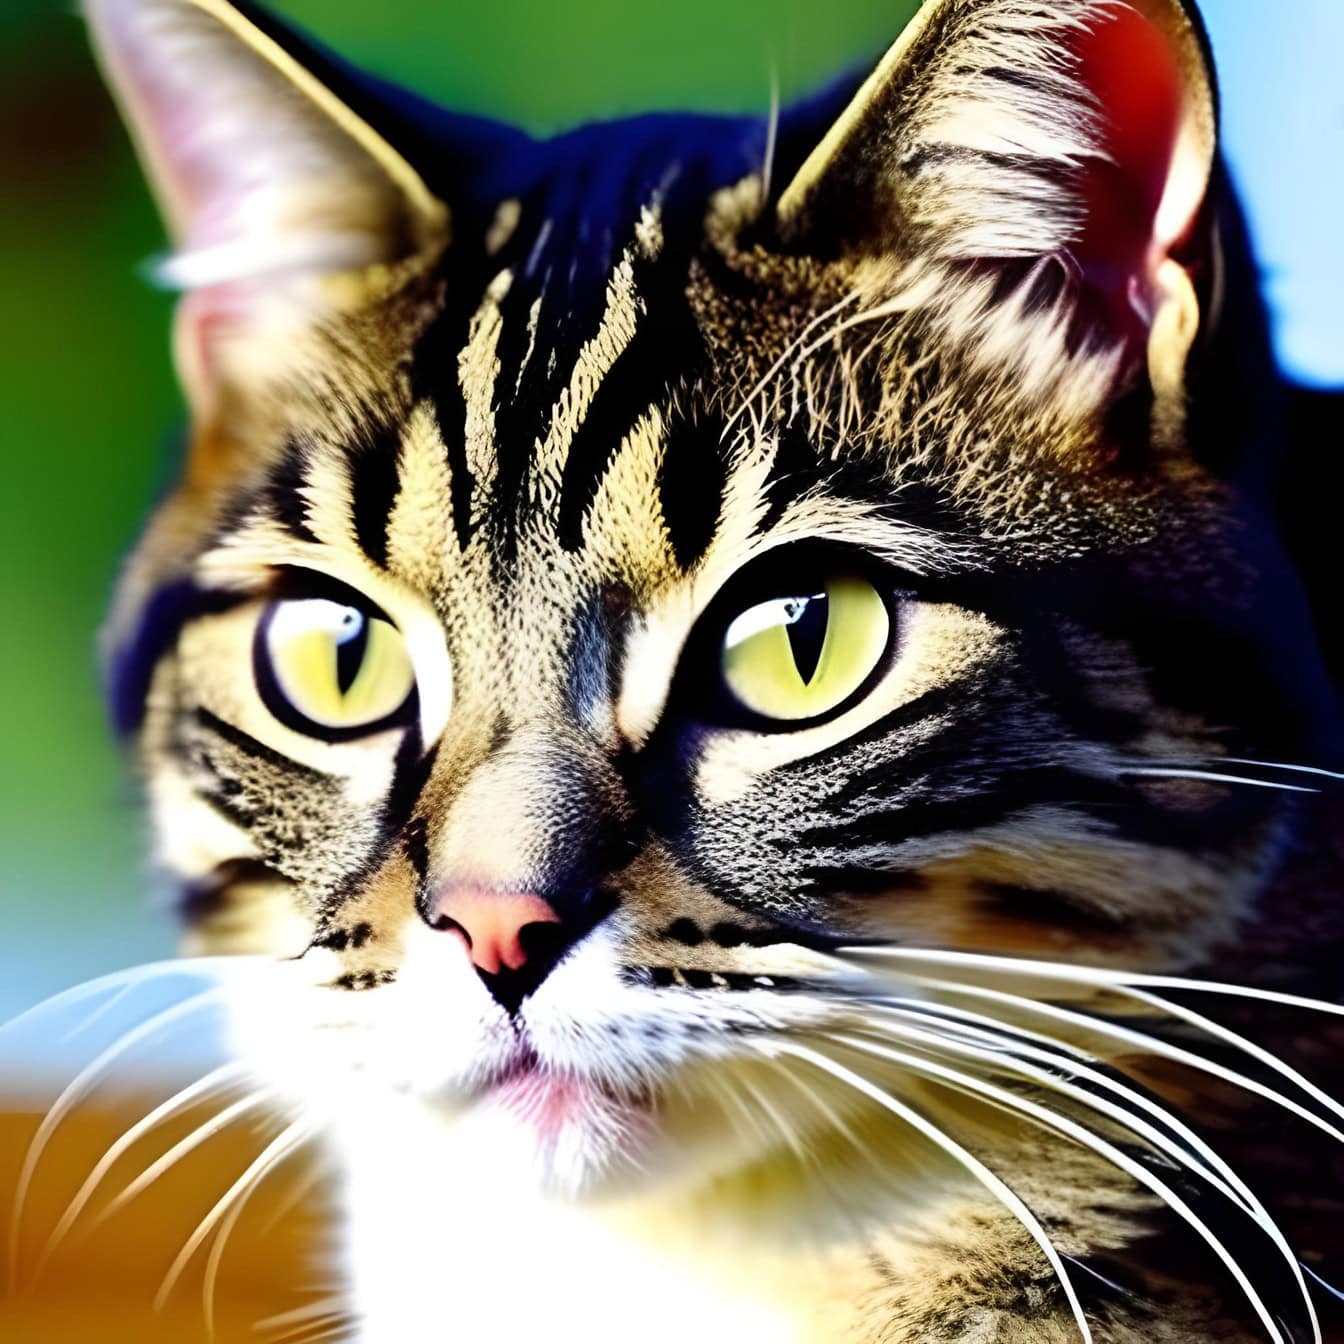 A close-up graphic of an European domestic cat